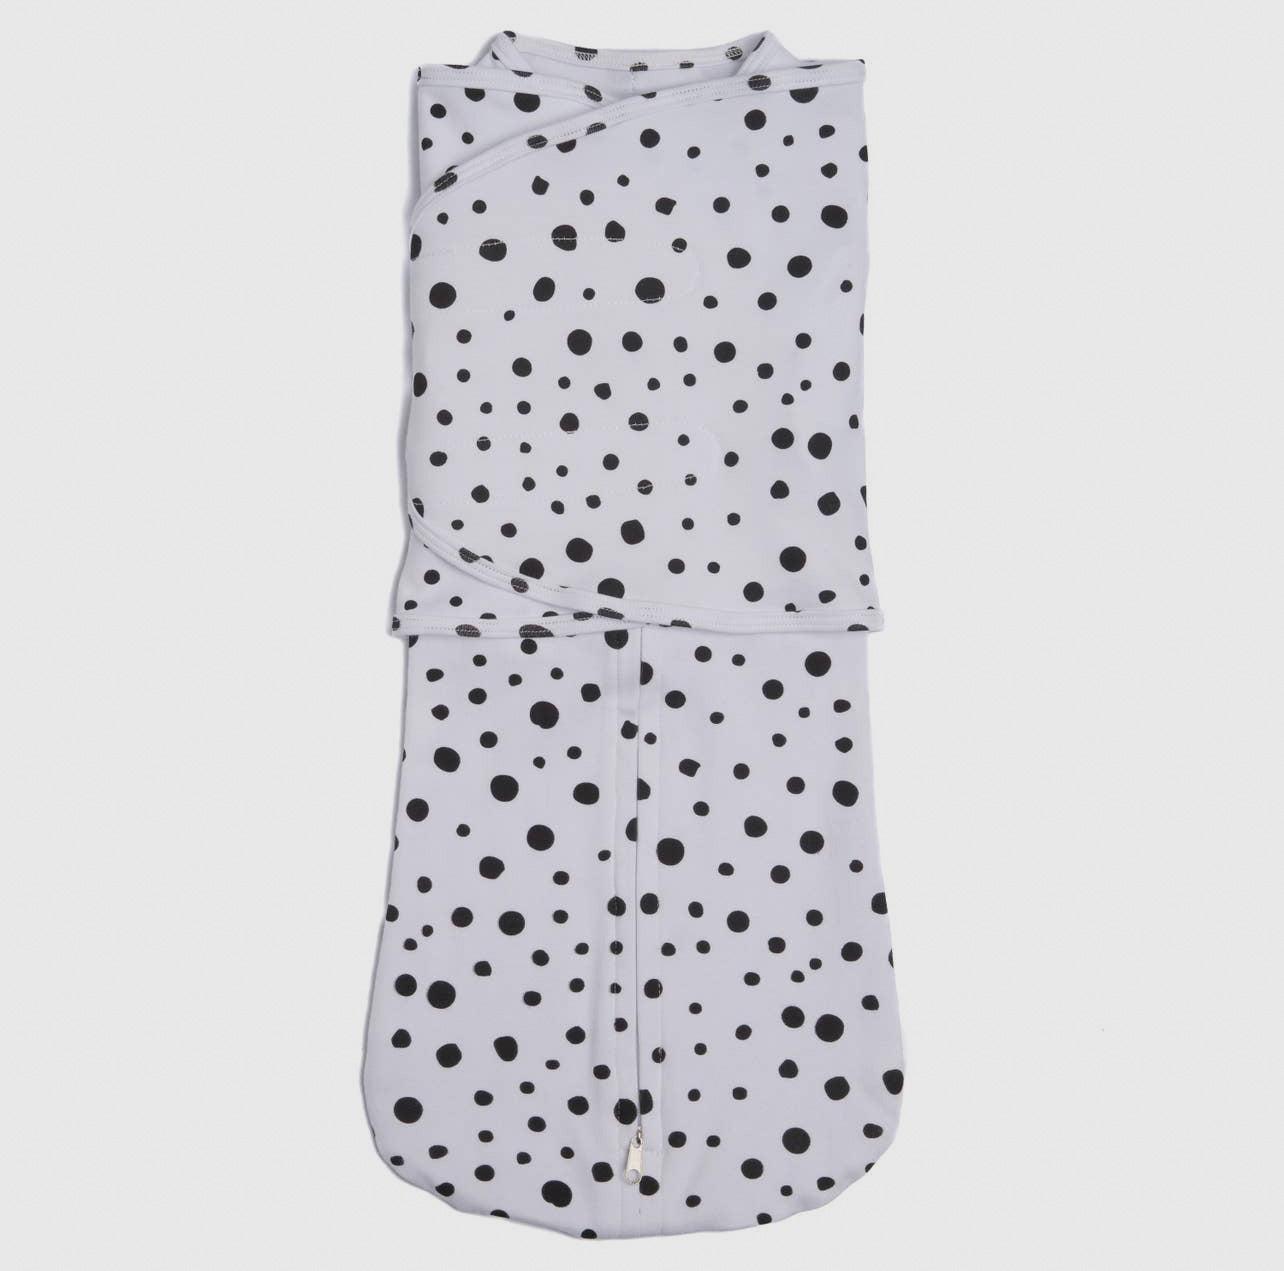 LullaBaby Swaddle, The Sleep Swaddle Solution- Black/White Spotted